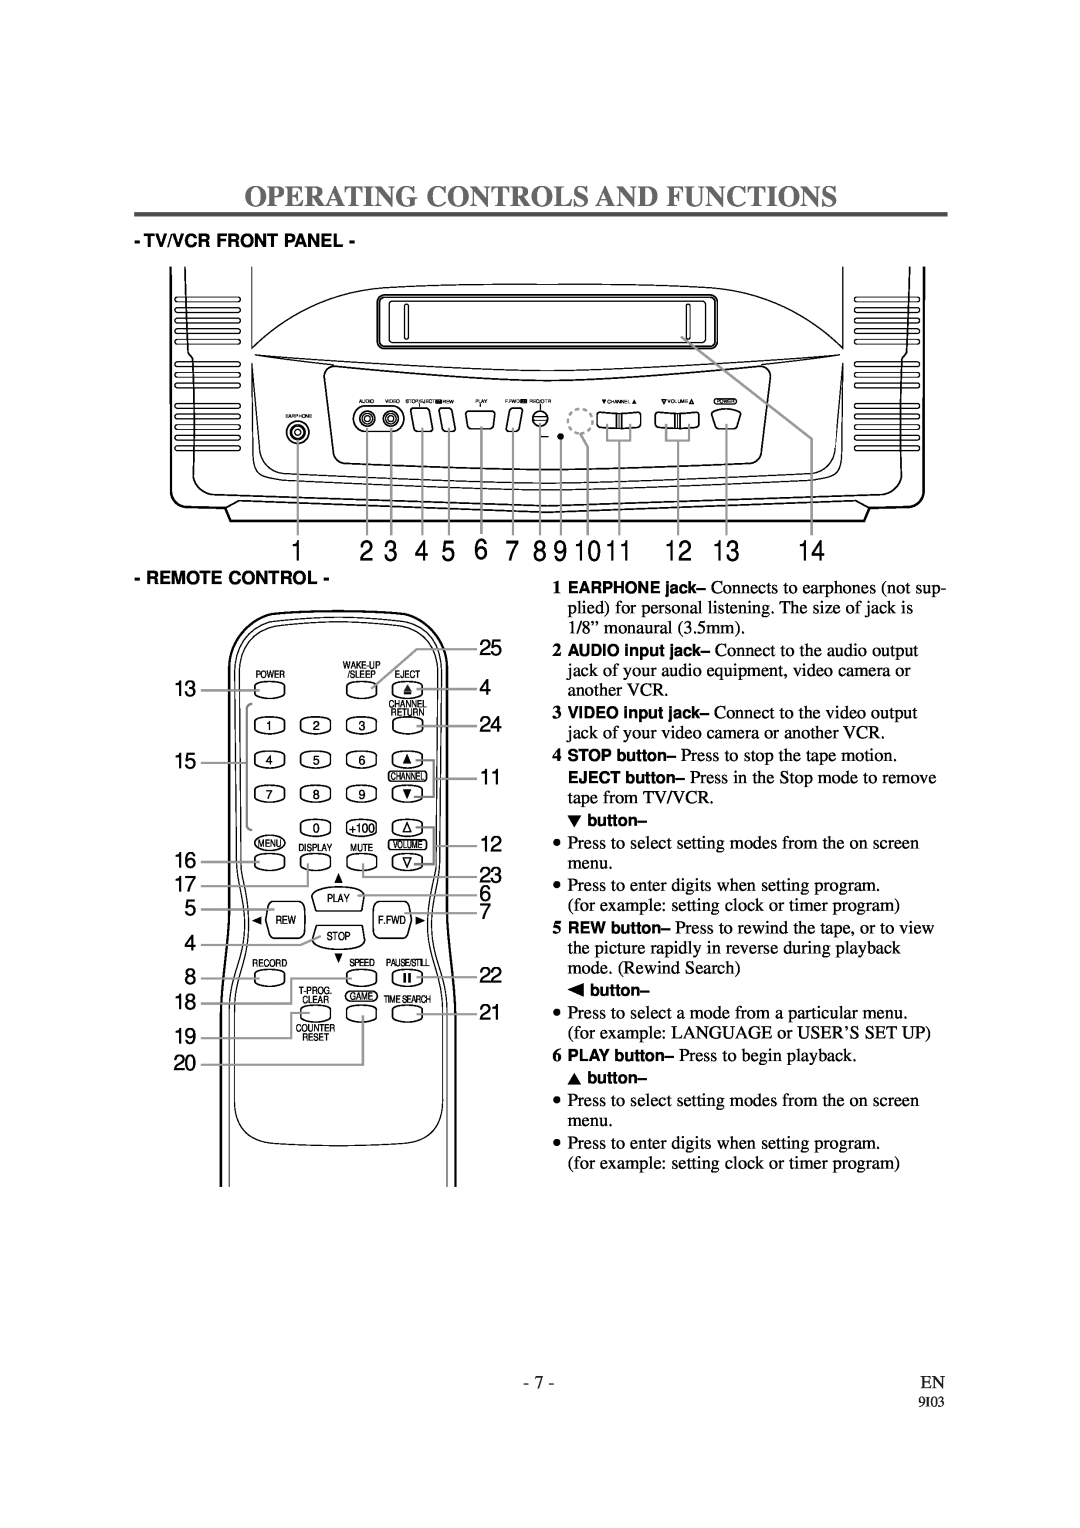 Symphonic WF-13C2 owner manual Operating Controls And Functions, Tv/Vcr Front Panel, Remote Control, 7 8 9 10 